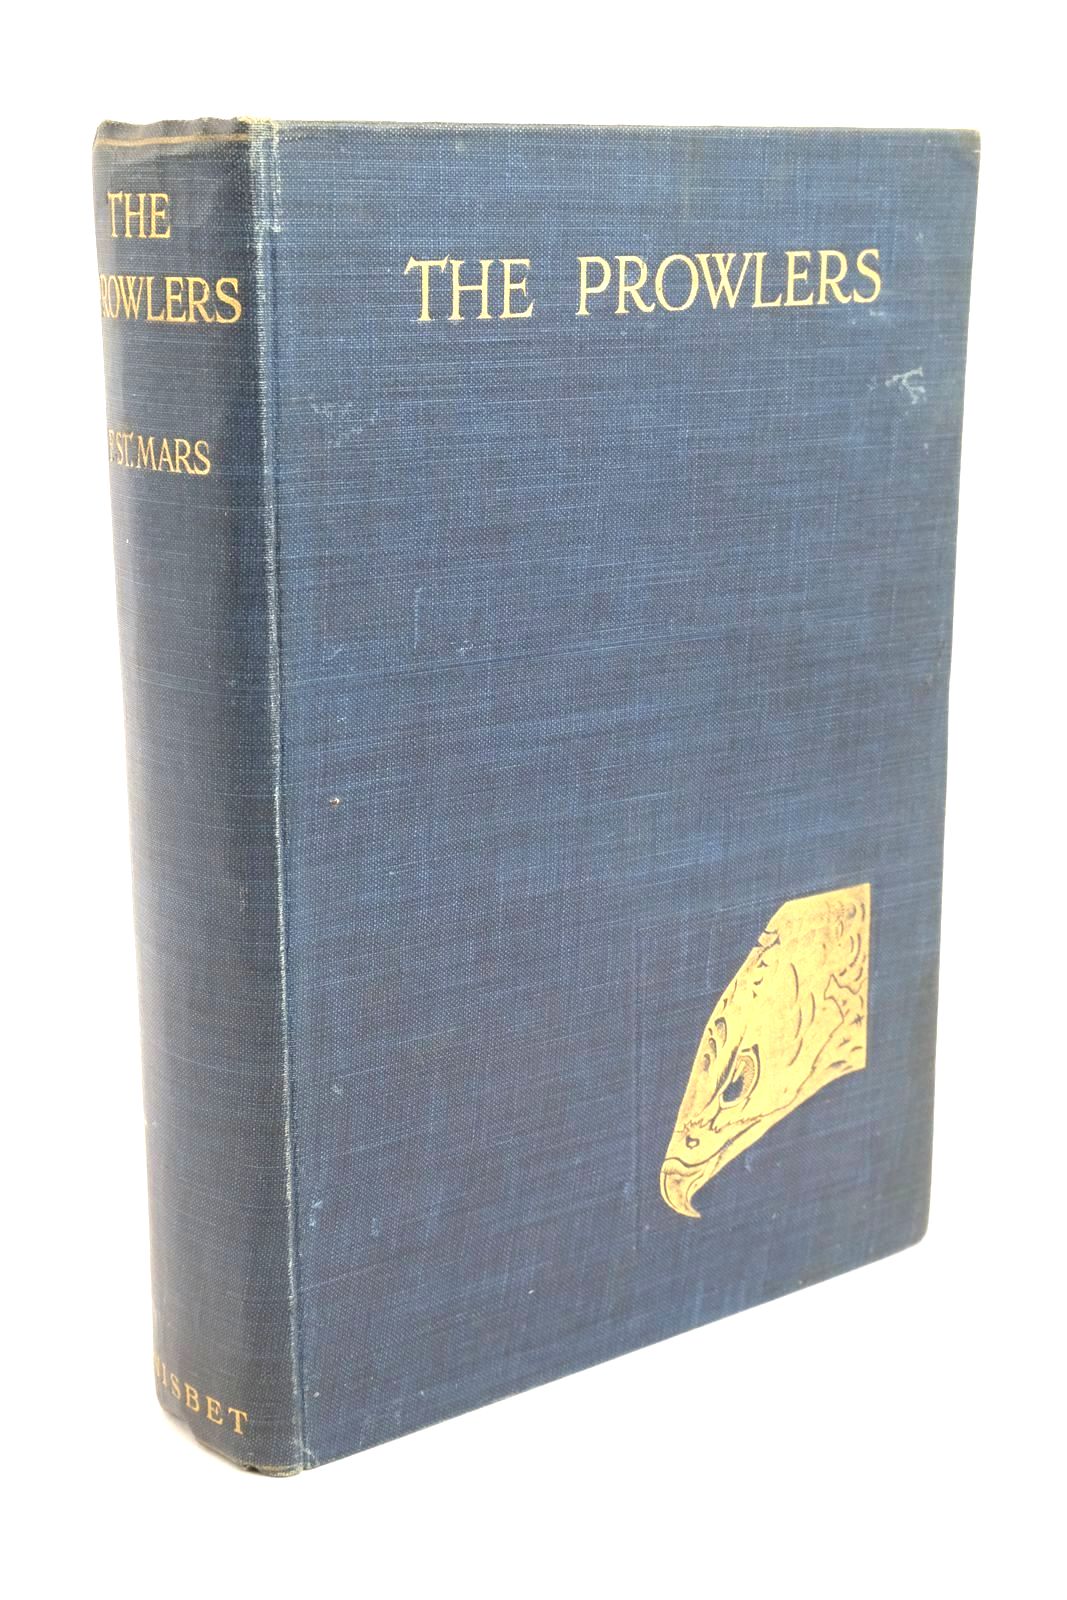 Photo of THE PROWLERS written by Mars, F. St. illustrated by Reynolds, Warwick published by James Nisbet &amp; Co. Ltd. (STOCK CODE: 1322219)  for sale by Stella & Rose's Books